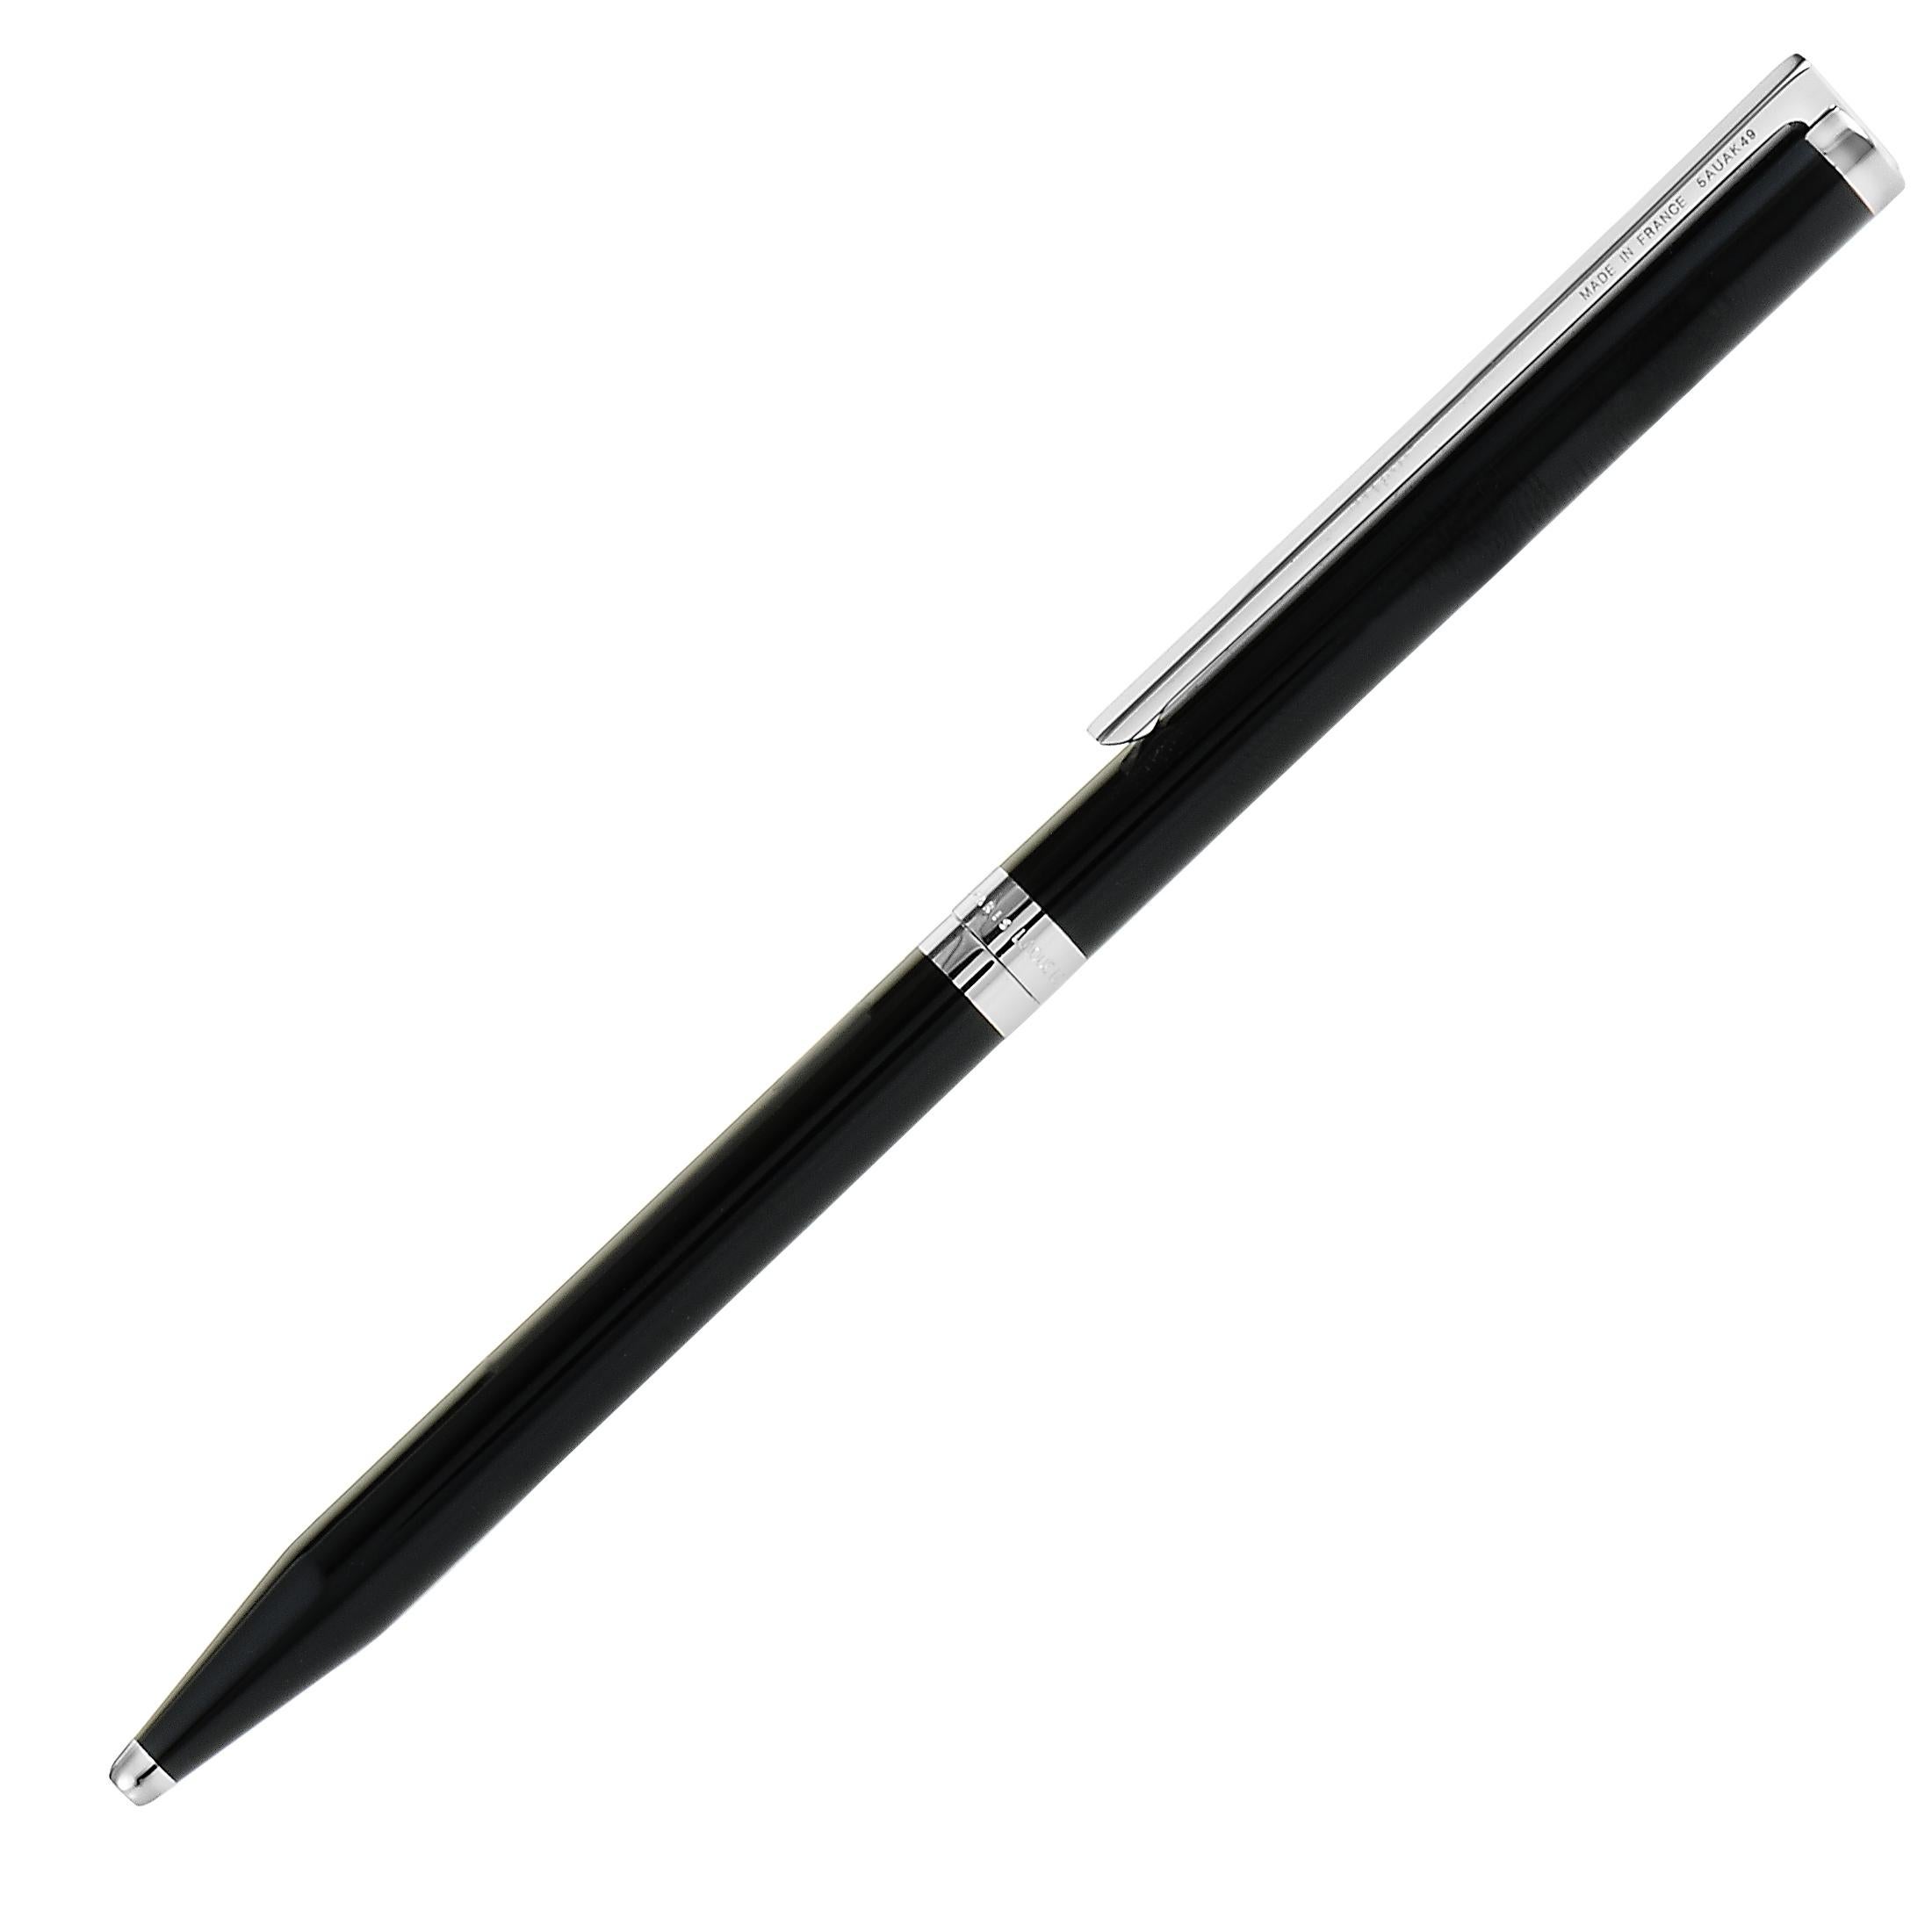 Beautifully two-toned and boasting an exceptionally elegant-looking, sleek silhouette, this exquisite ballpoint pen presented by S.T. Dupont offers an incredibly refined look. The pen features palladium finish and stylish black lacquer.